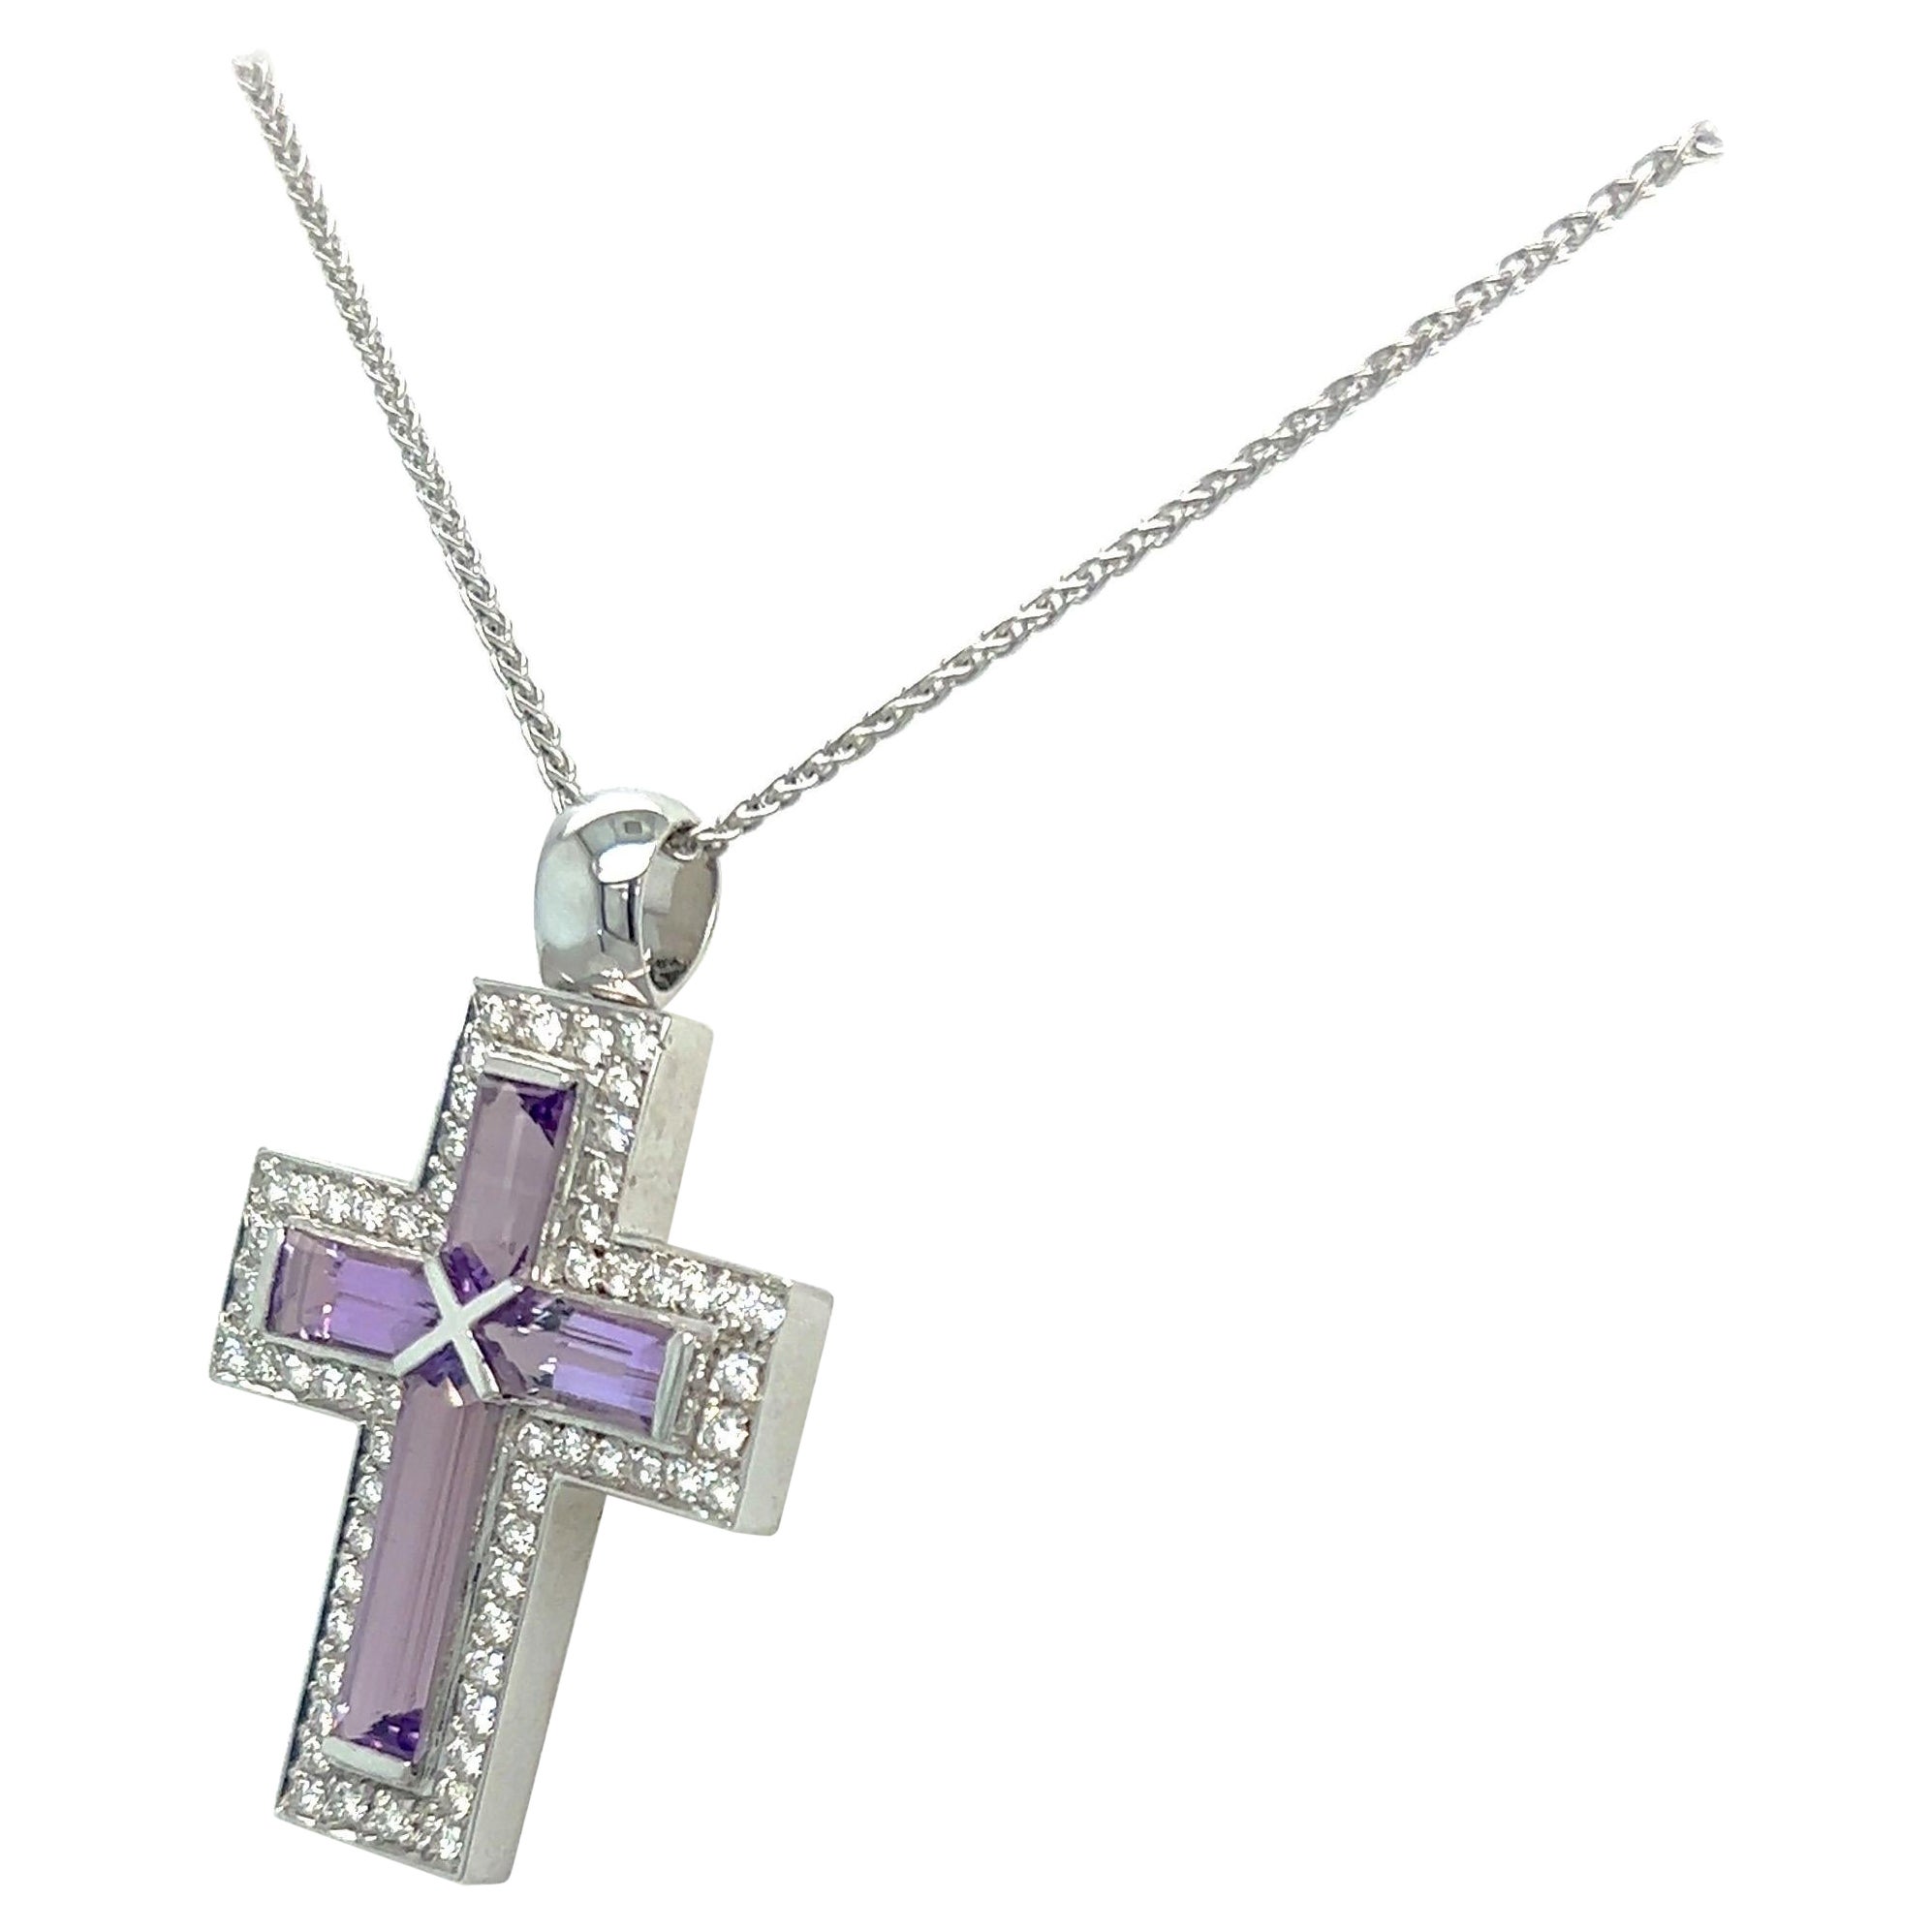 18 KT White Gold Cross Pendant Diamond 0.63 Cts. and Amethyst 1.00 cts. For Sale